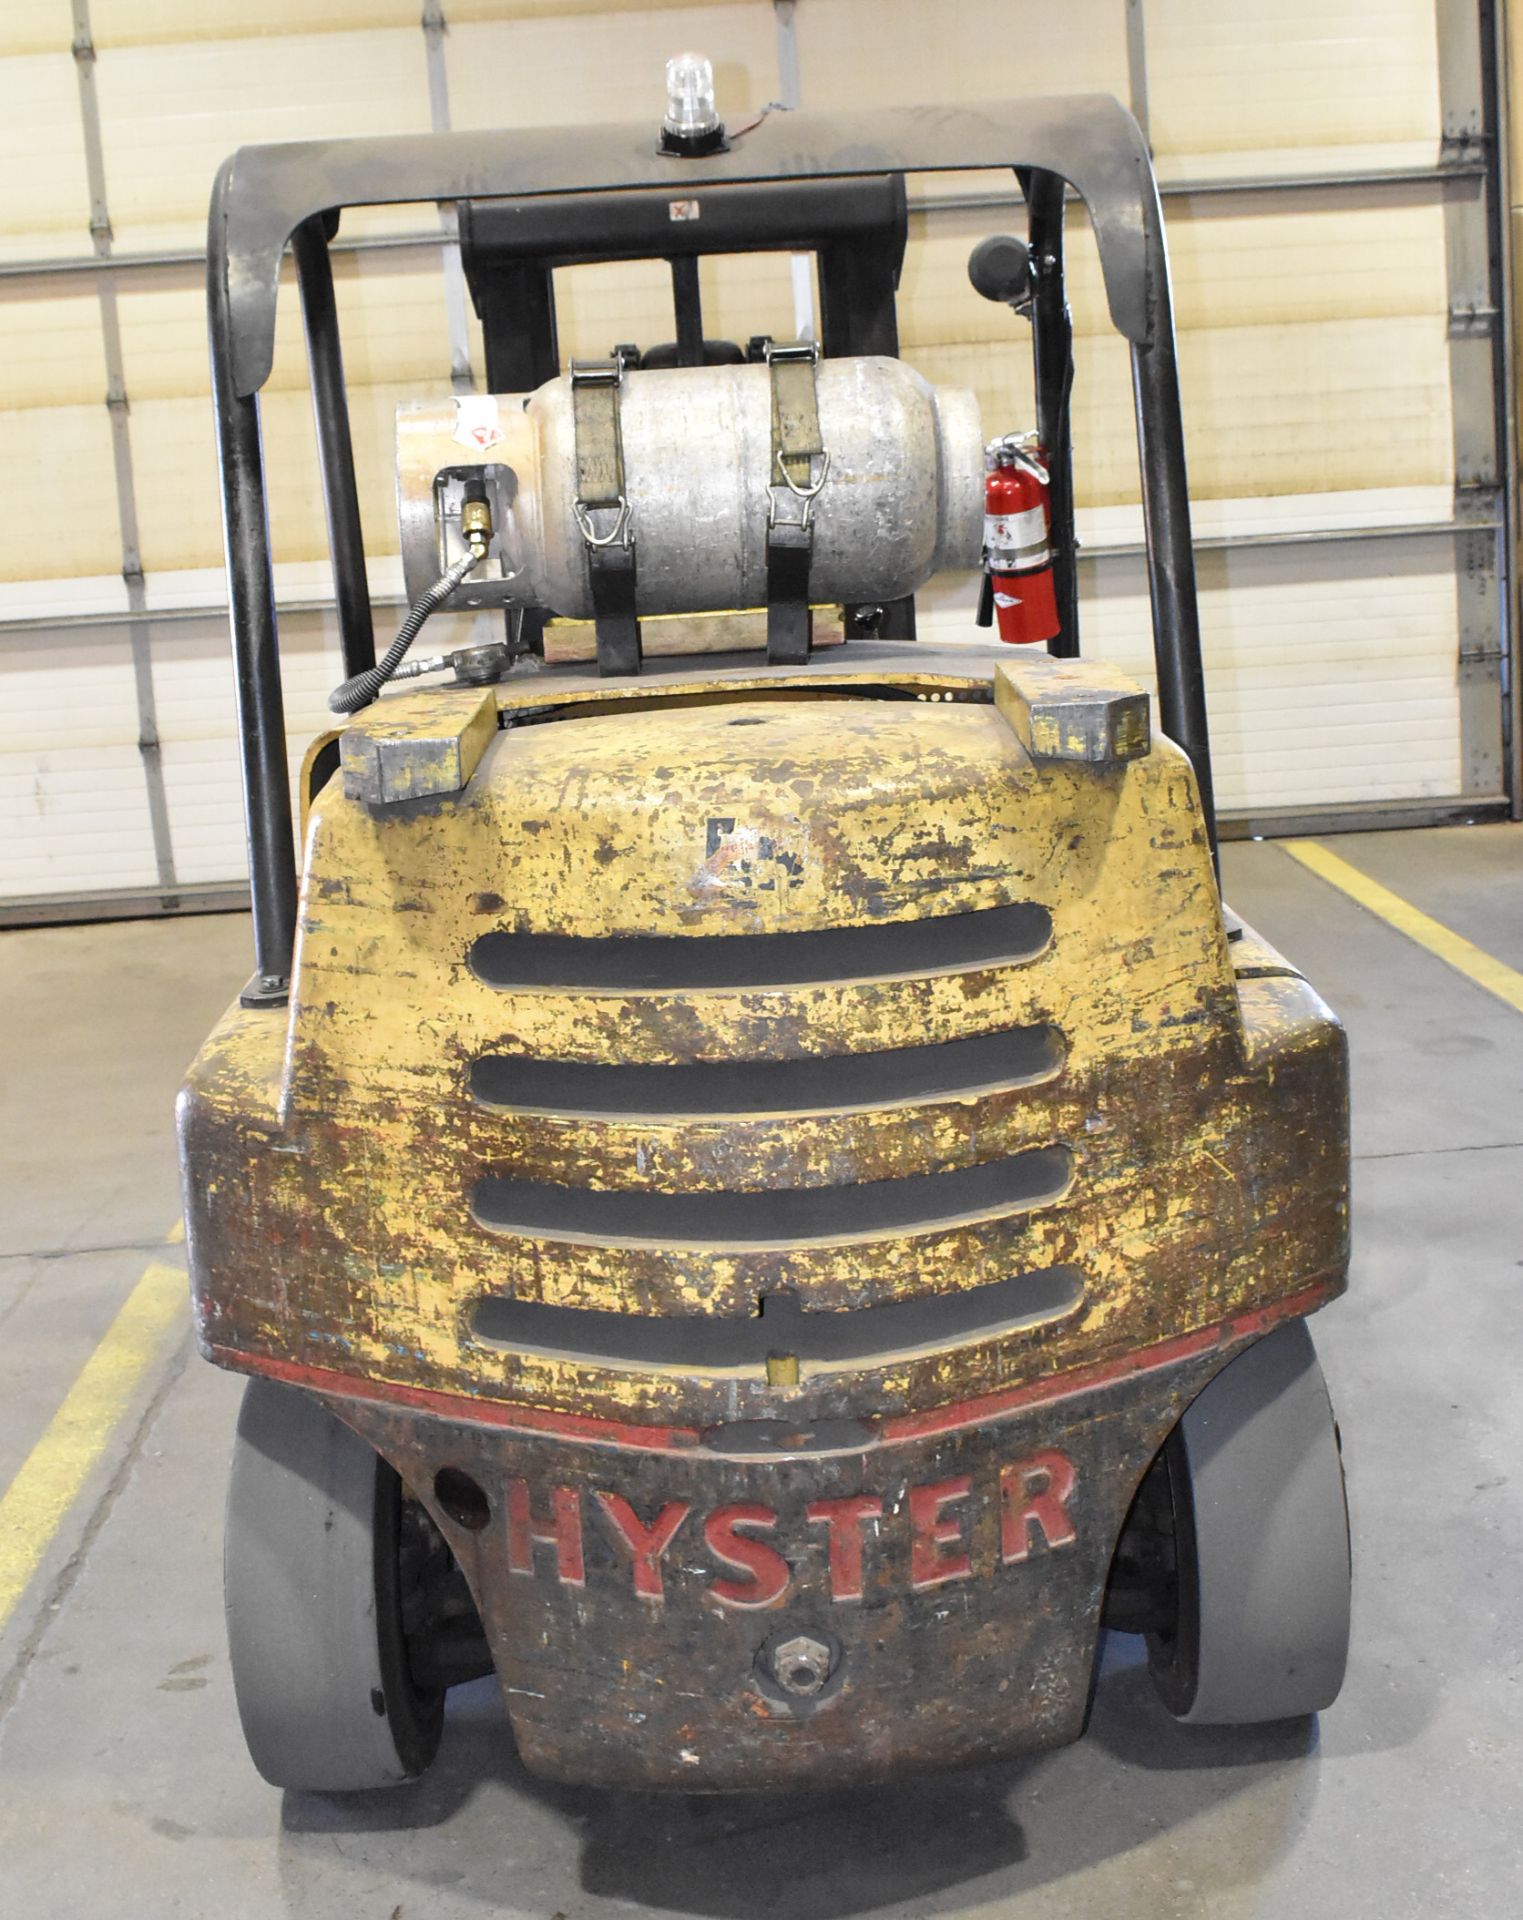 HYSTER S150A 15,000 LB. CAPACITY LPG FORKLIFT WITH 129" MAX. LIFT HEIGHT, 2-STAGE MAST, SOLID TIRES, - Image 7 of 18